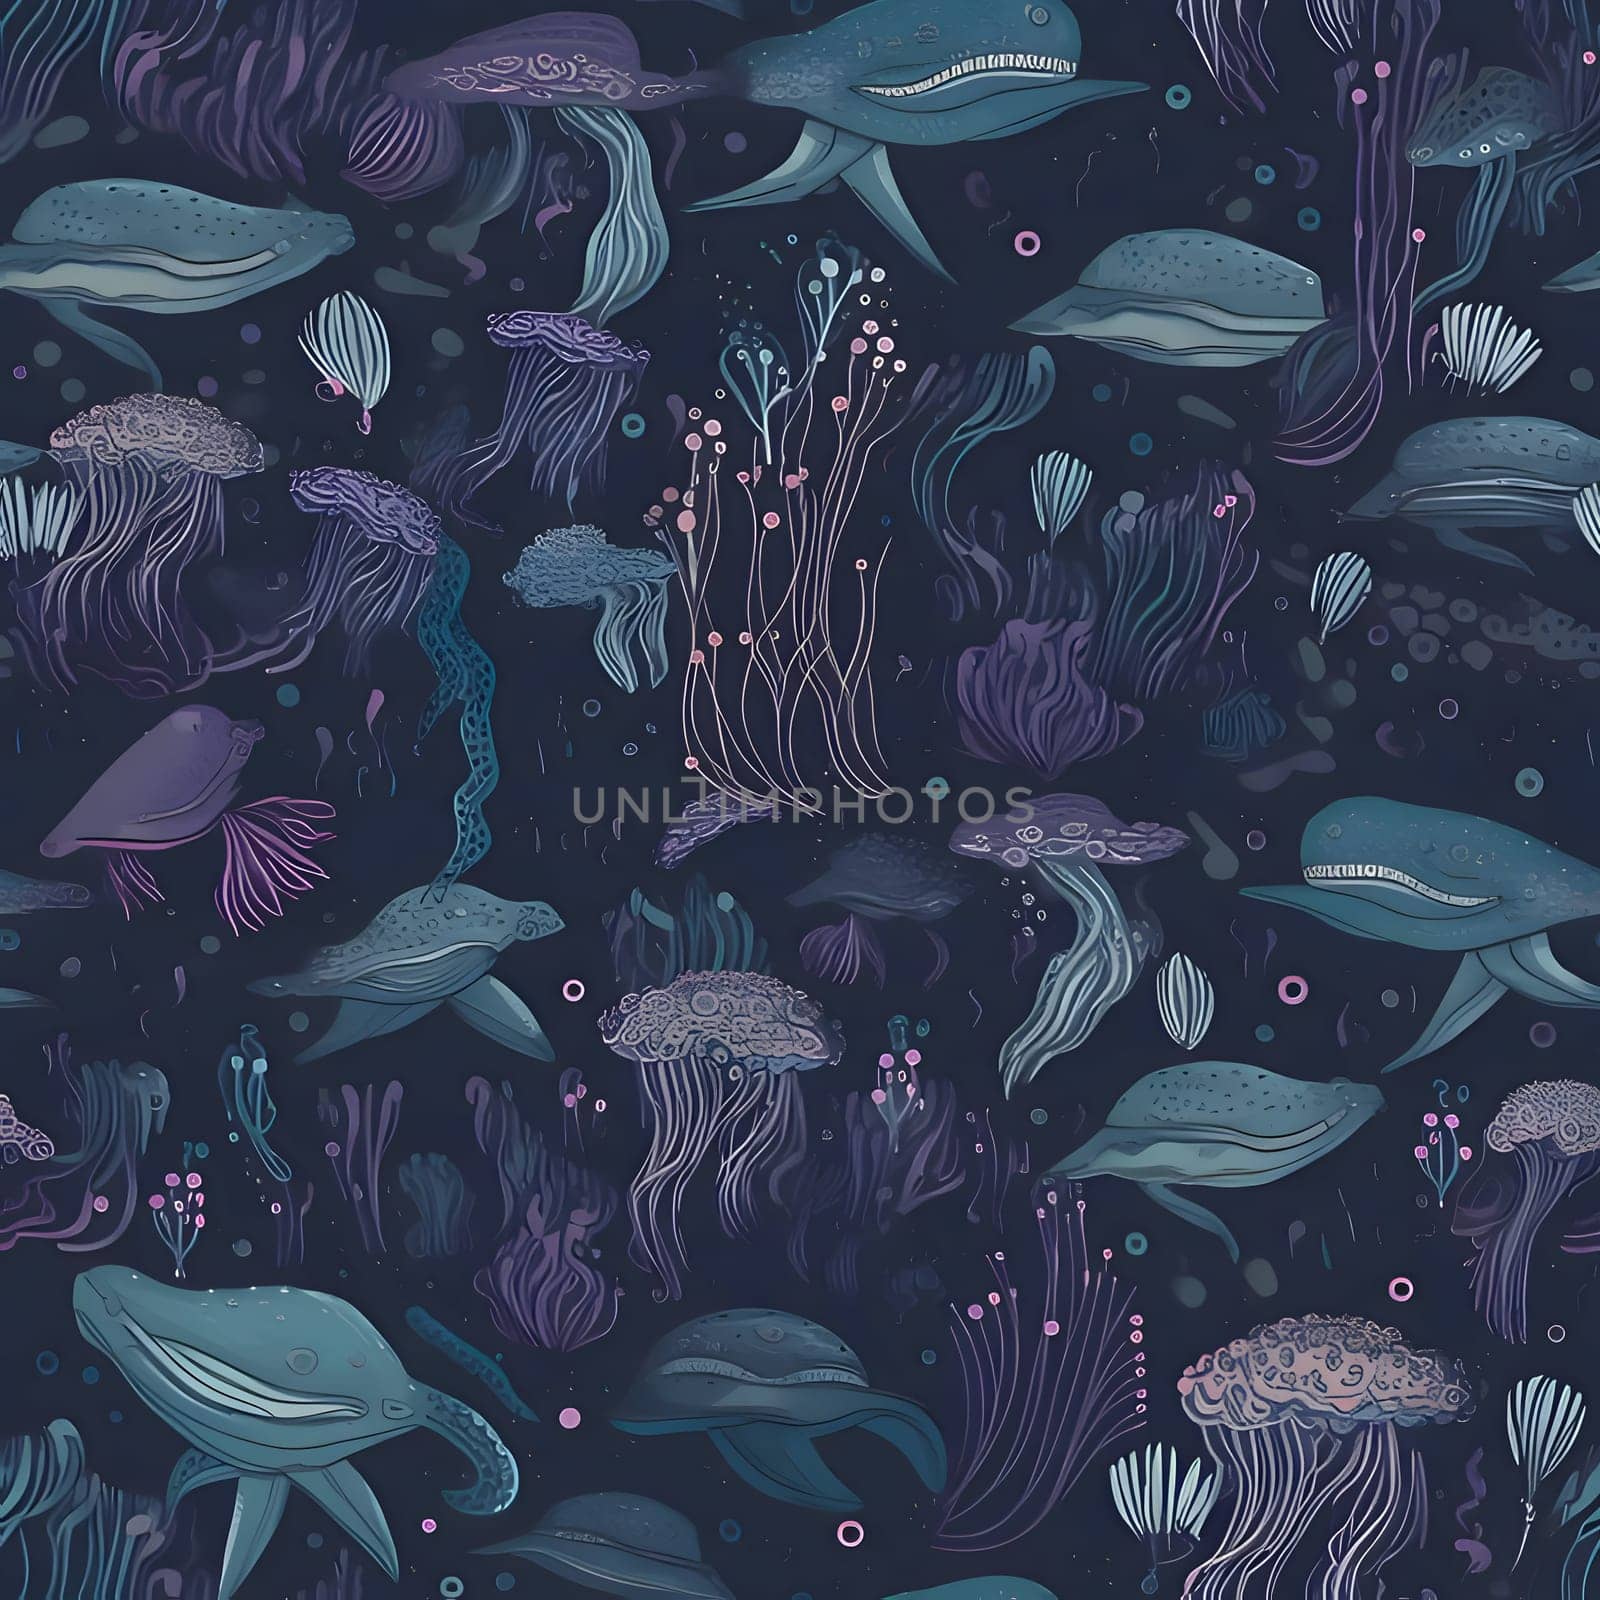 Patterns and banners backgrounds: Seamless pattern with whale, jellyfish and marine plants.